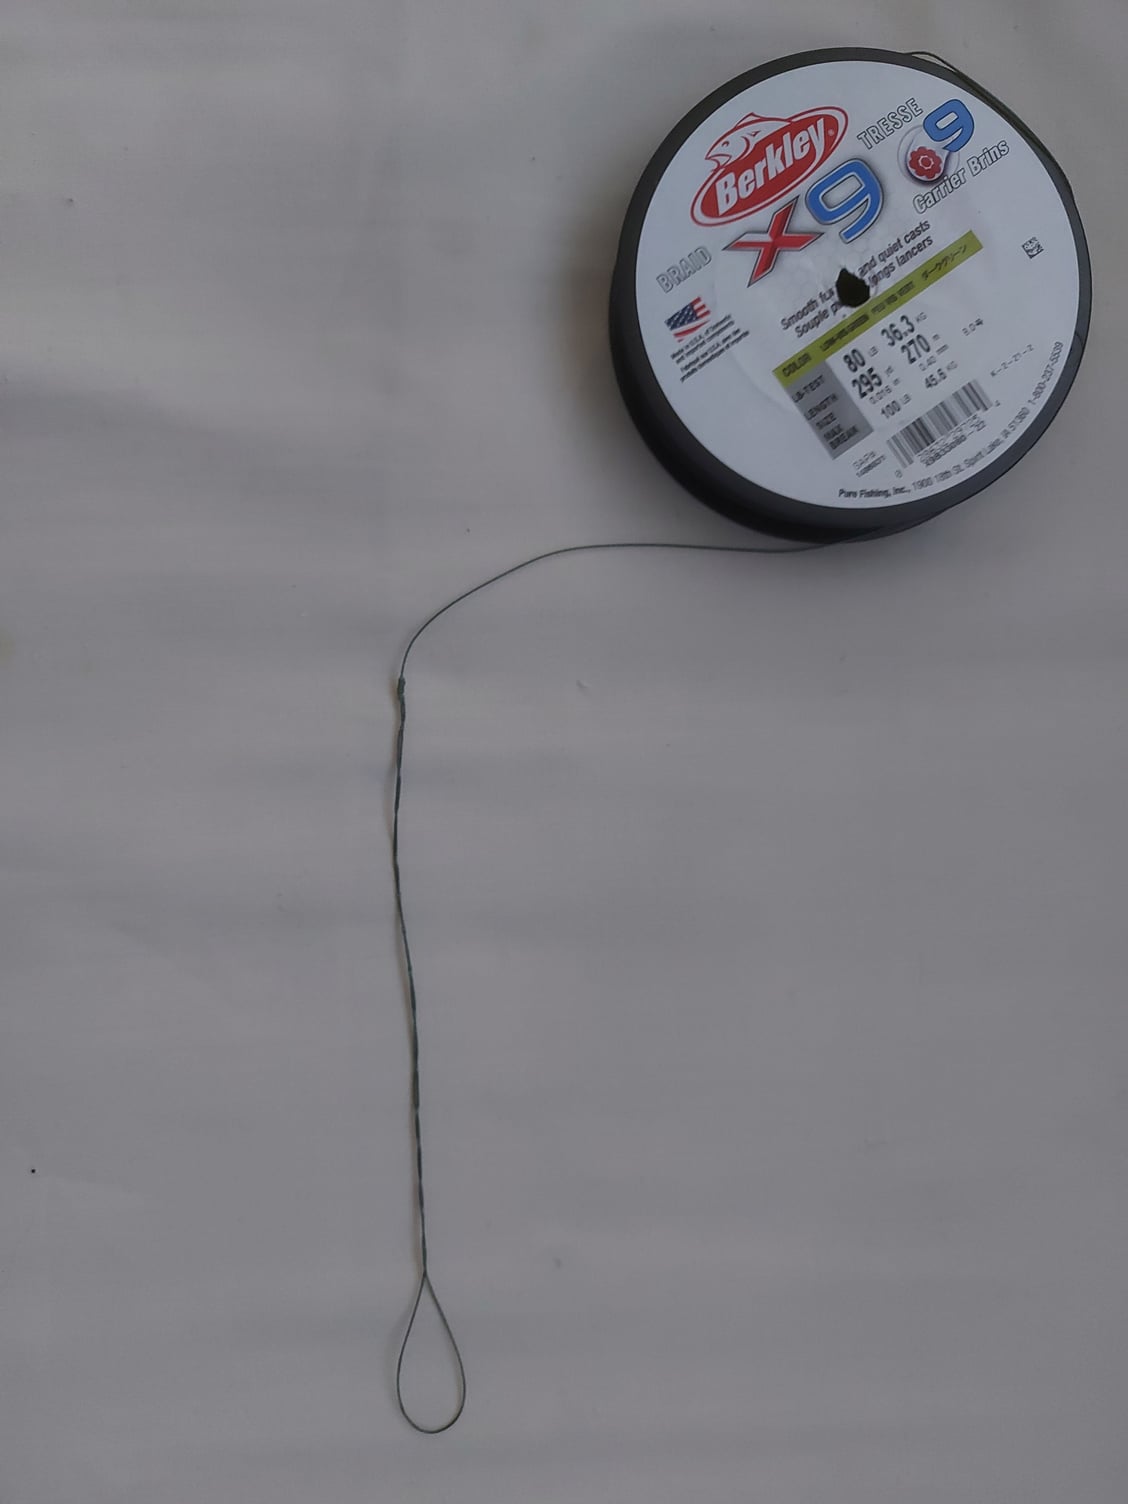 Berkley X9 solid Braid 80lb stitched loop knot - The Hull Truth - Boating  and Fishing Forum